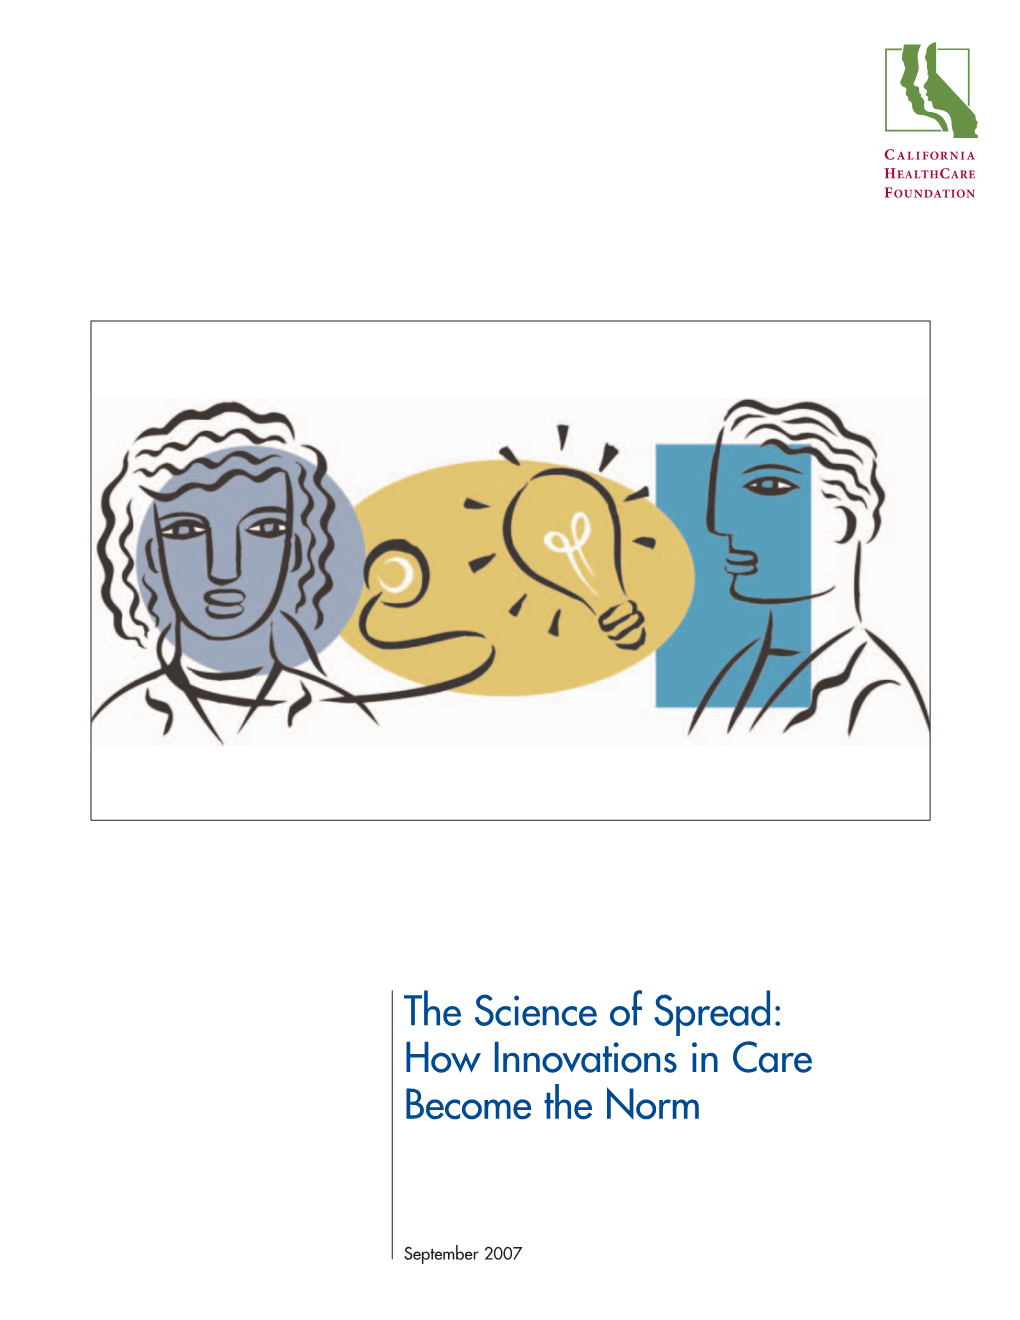 The Science of Spread: How Innovations in Care Become the Norm